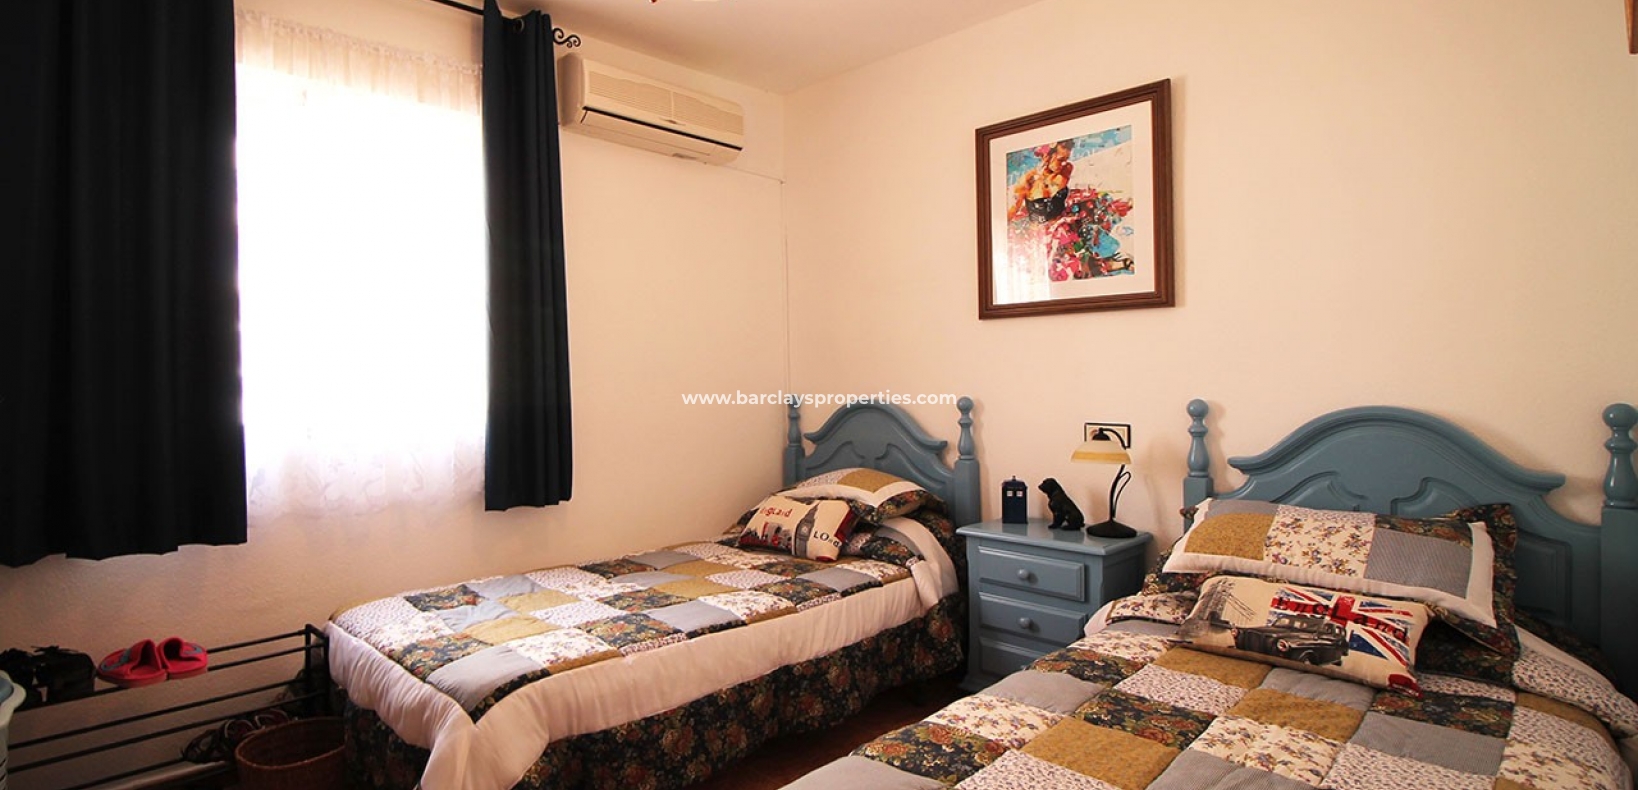 Bedroom - South Facing Property for Sale in La Marina Spain